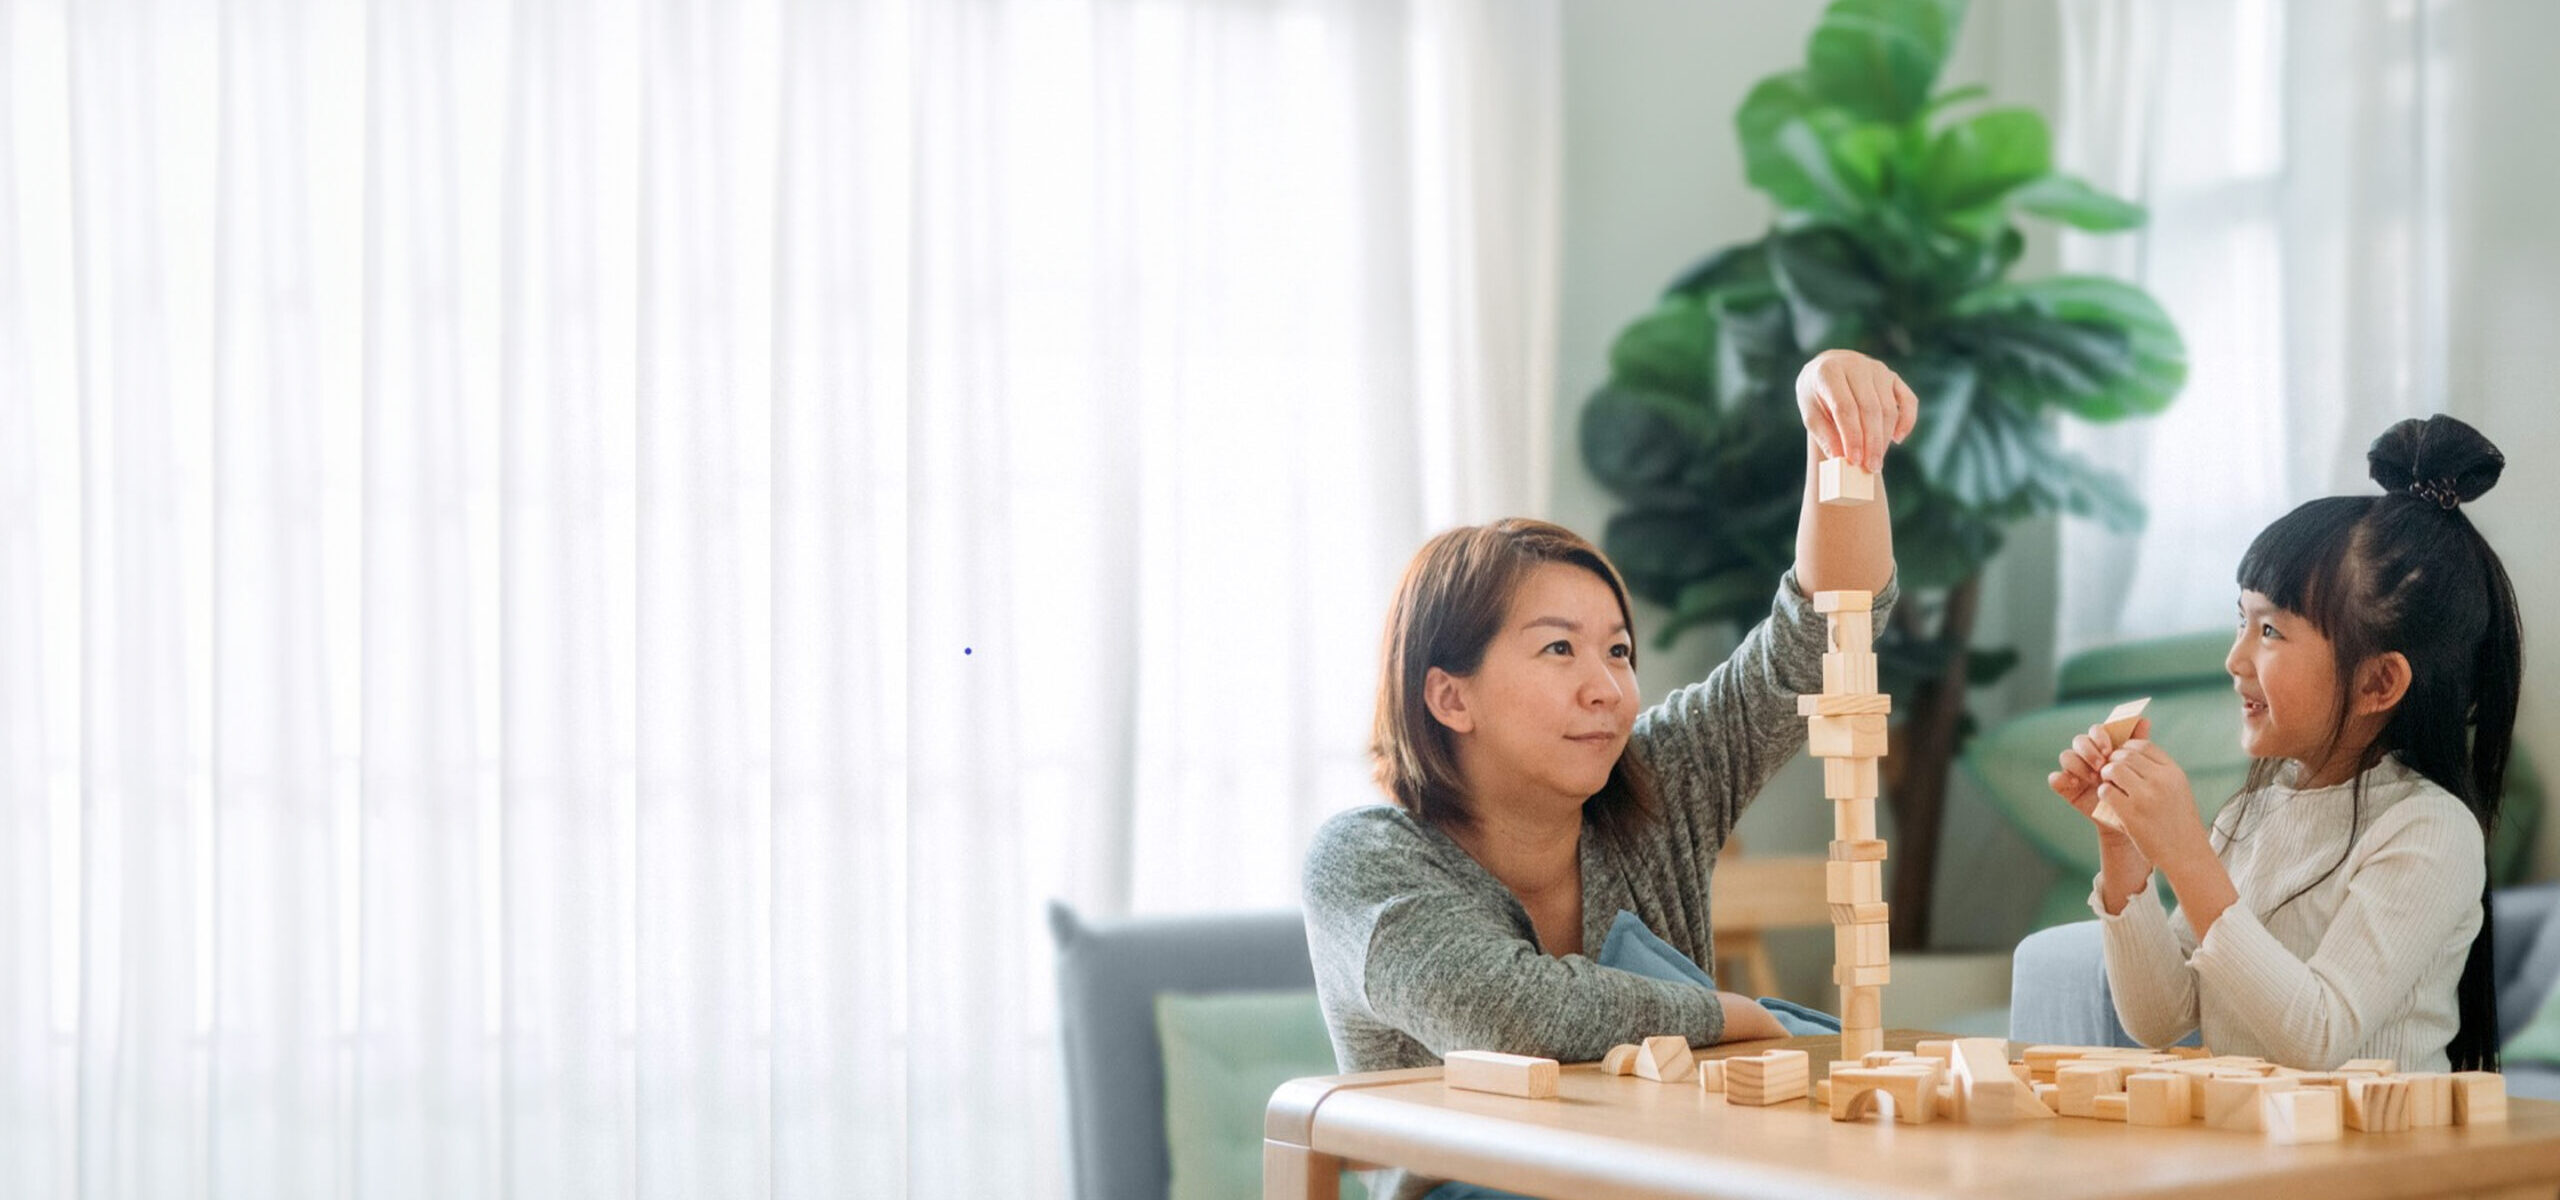 Wealth management: Mother and child playing with wooden blocks